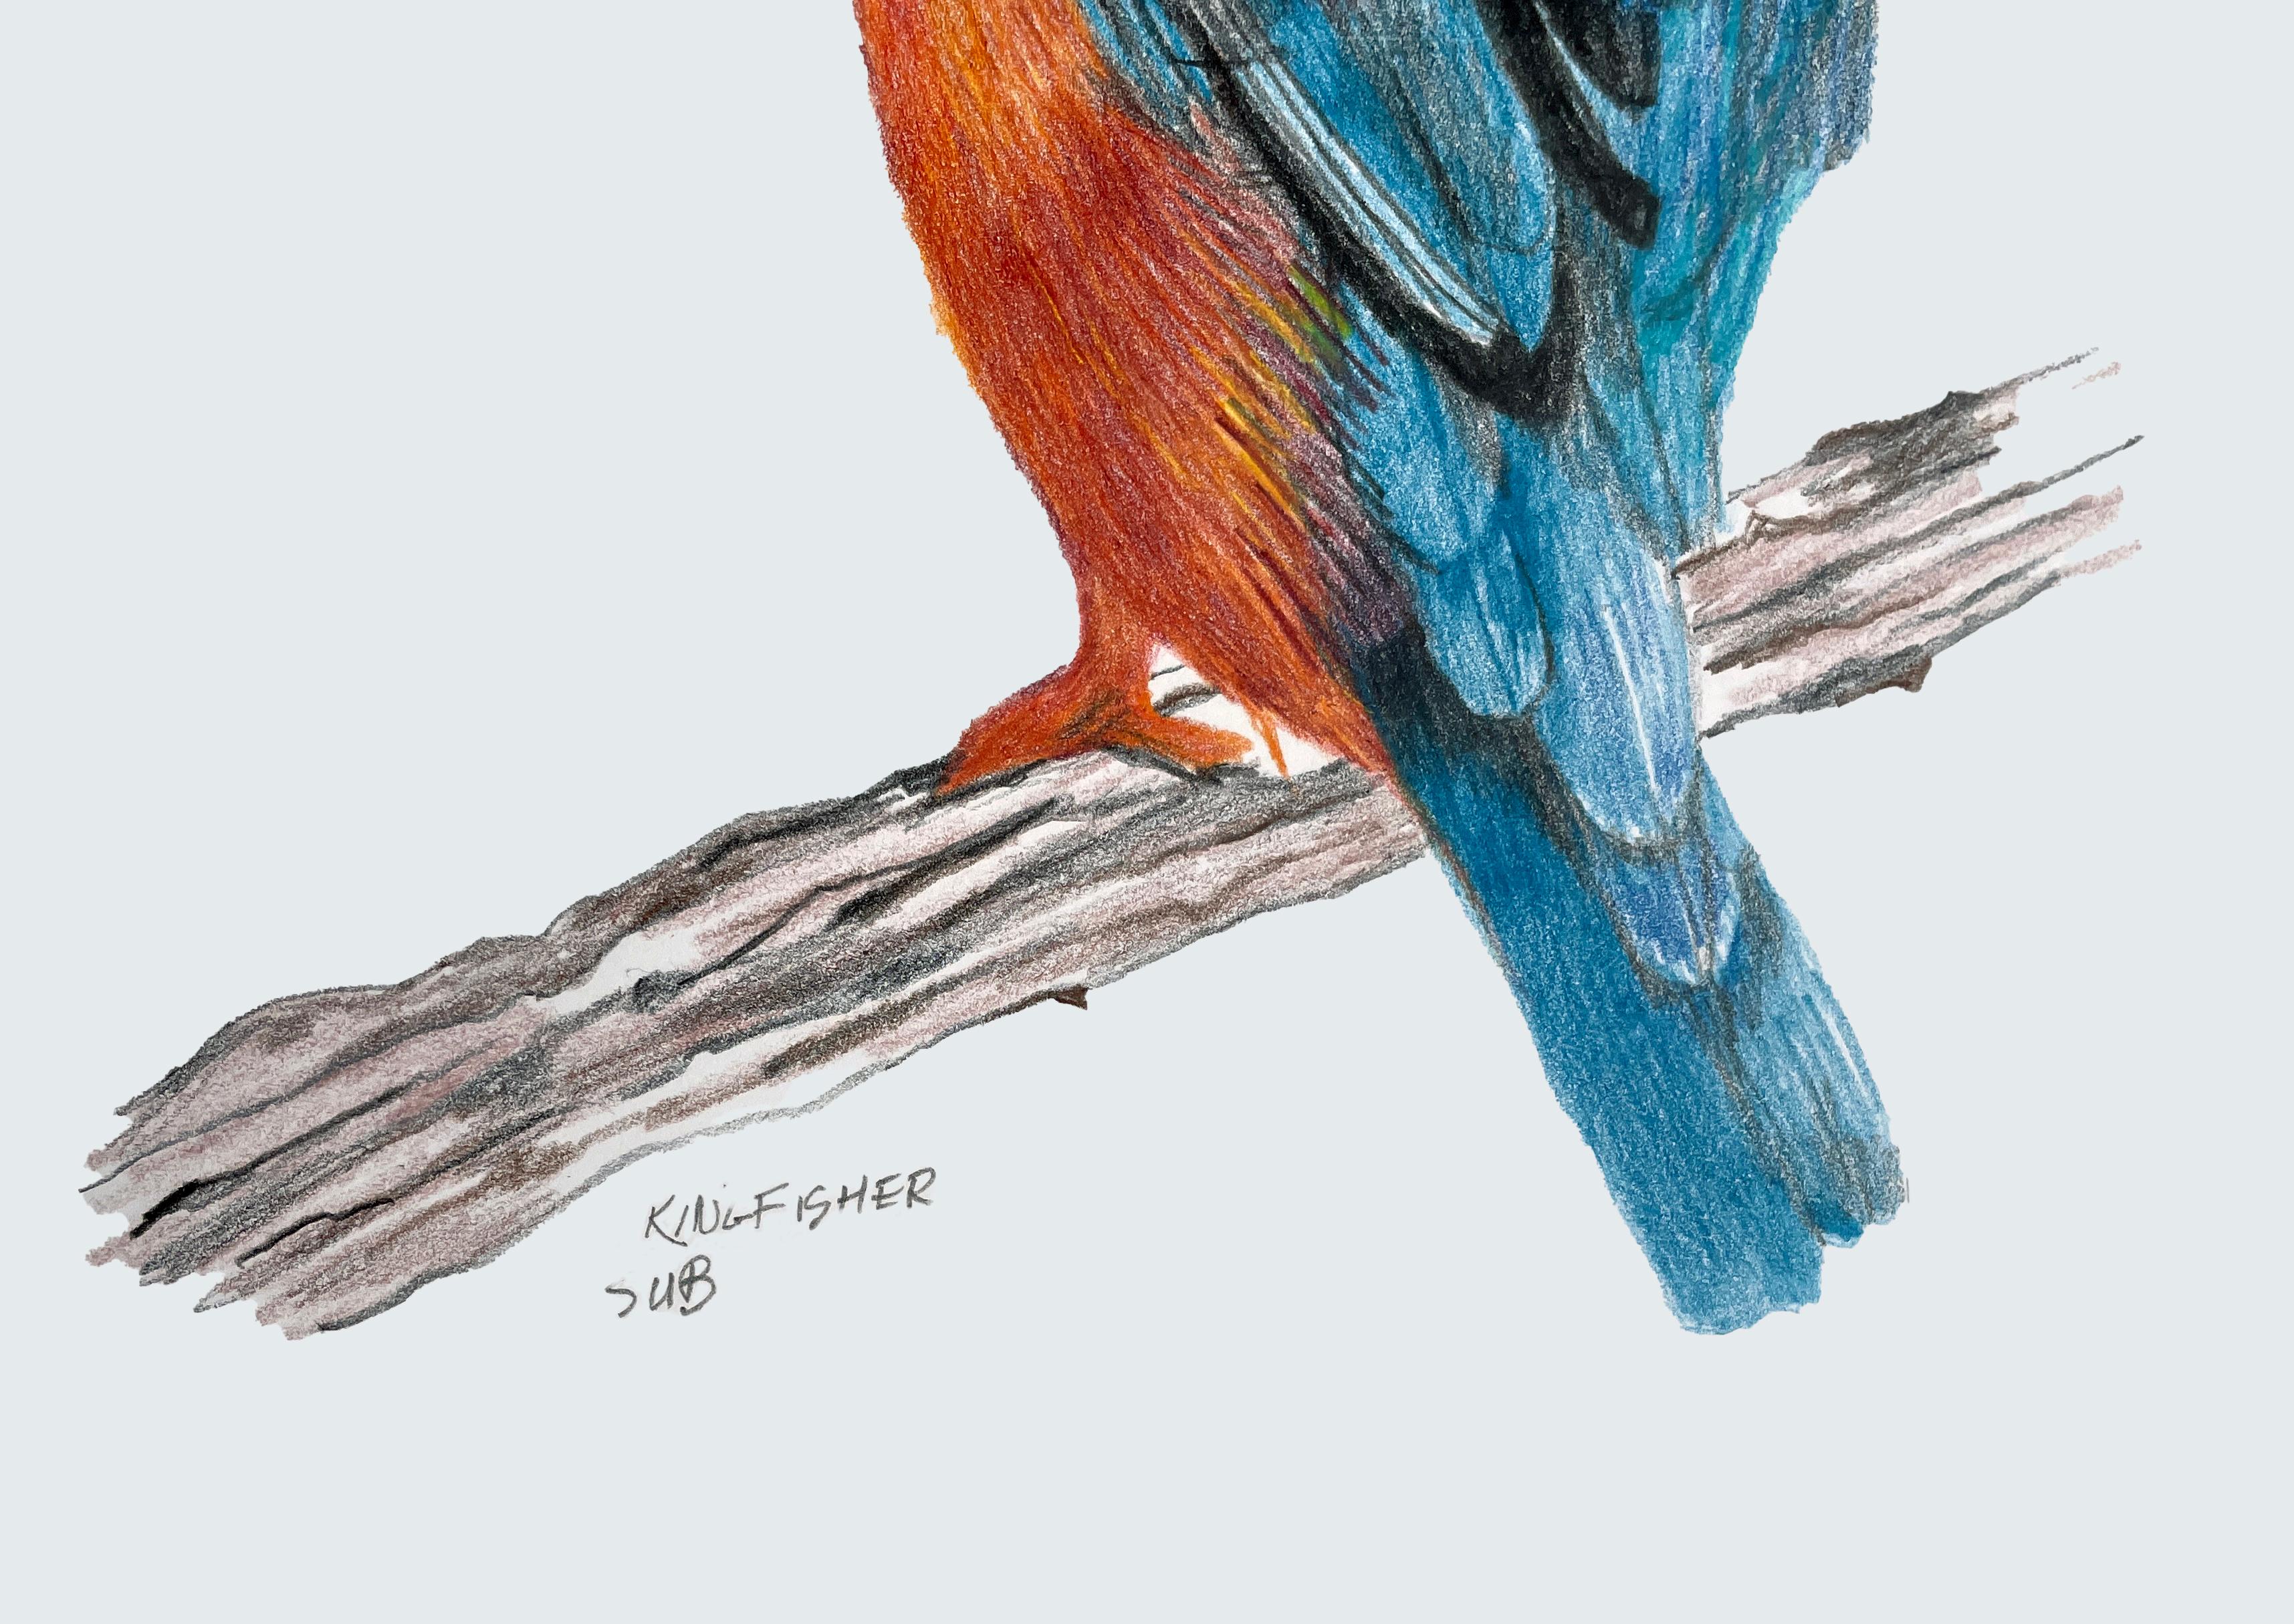 American Kingfisher, Colored Pencil Drawing with Blue, Orange, Brown, Matted & Framed For Sale